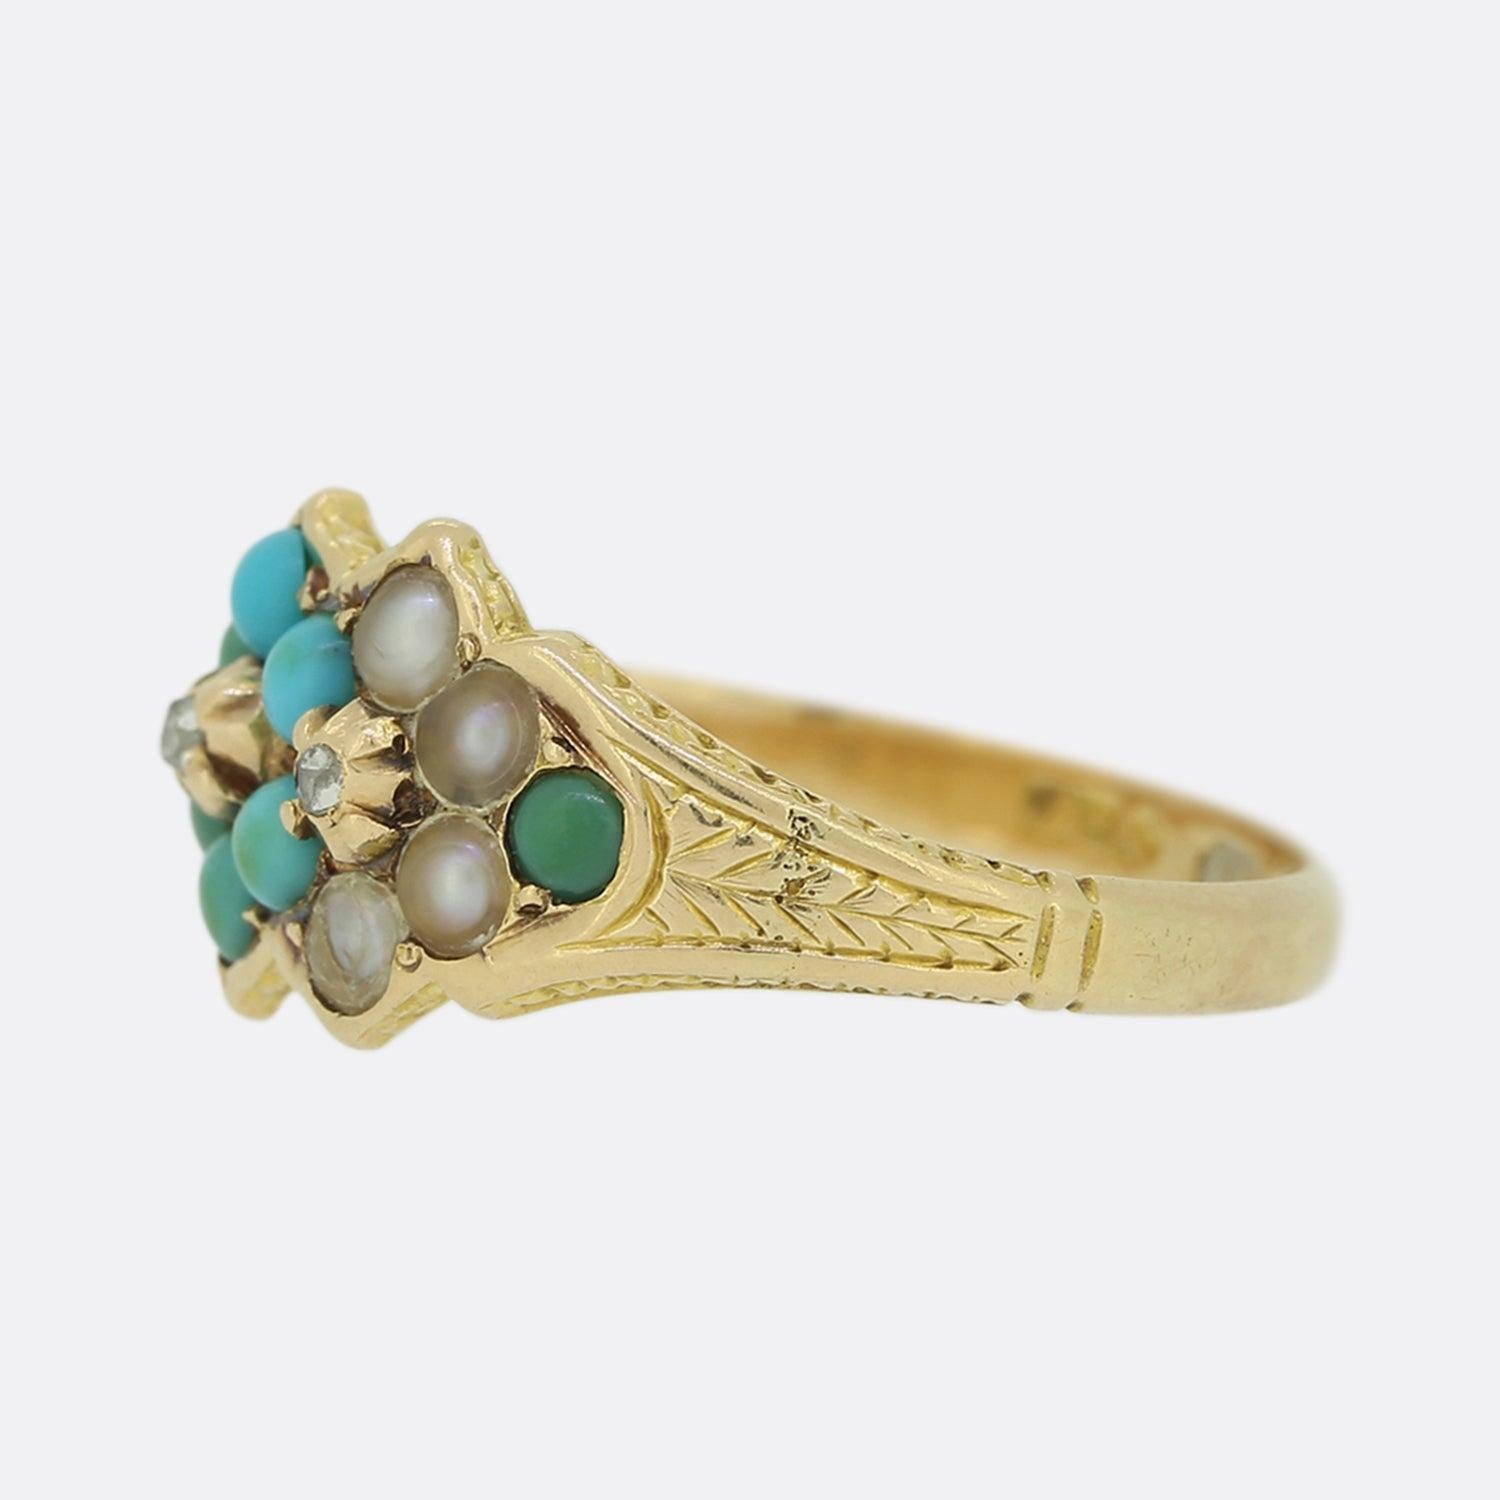 This is a 15ct yellow gold turquoise and pearl cluster ring from the Victorian era. The ring features a cluster of round natural pearls with a centralised rose cut diamond and a cluster of turquoise also with a centralised diamond. Turquoise and